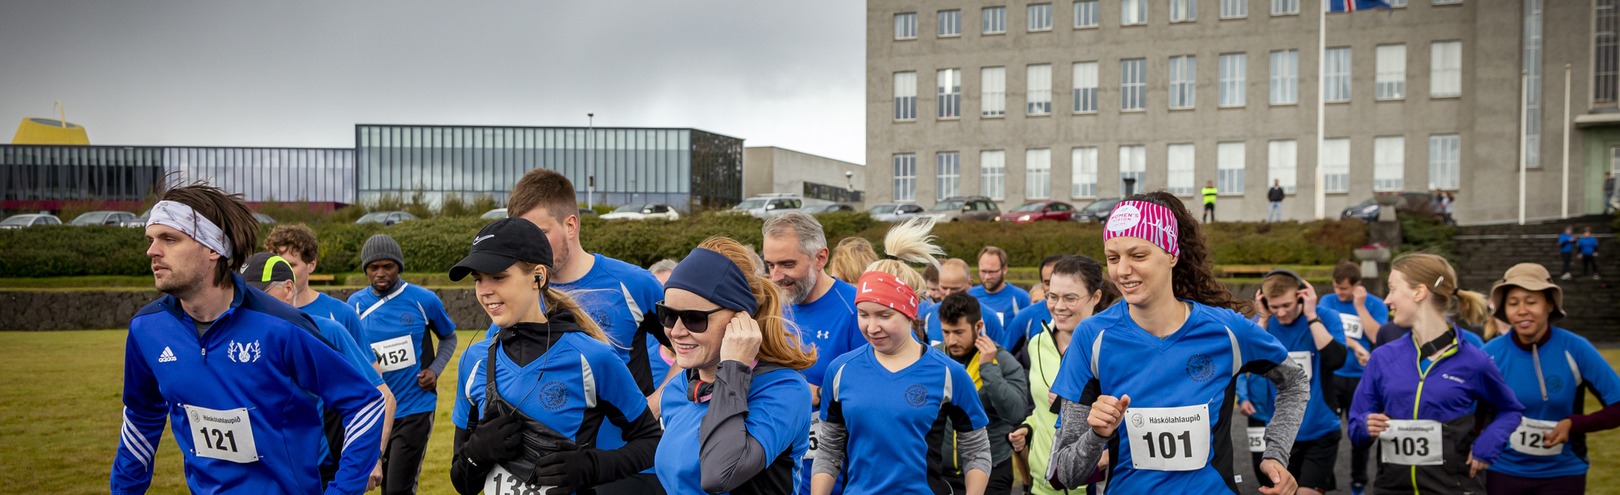 Registration for the University Run 2024 is now open - Available at University of Iceland